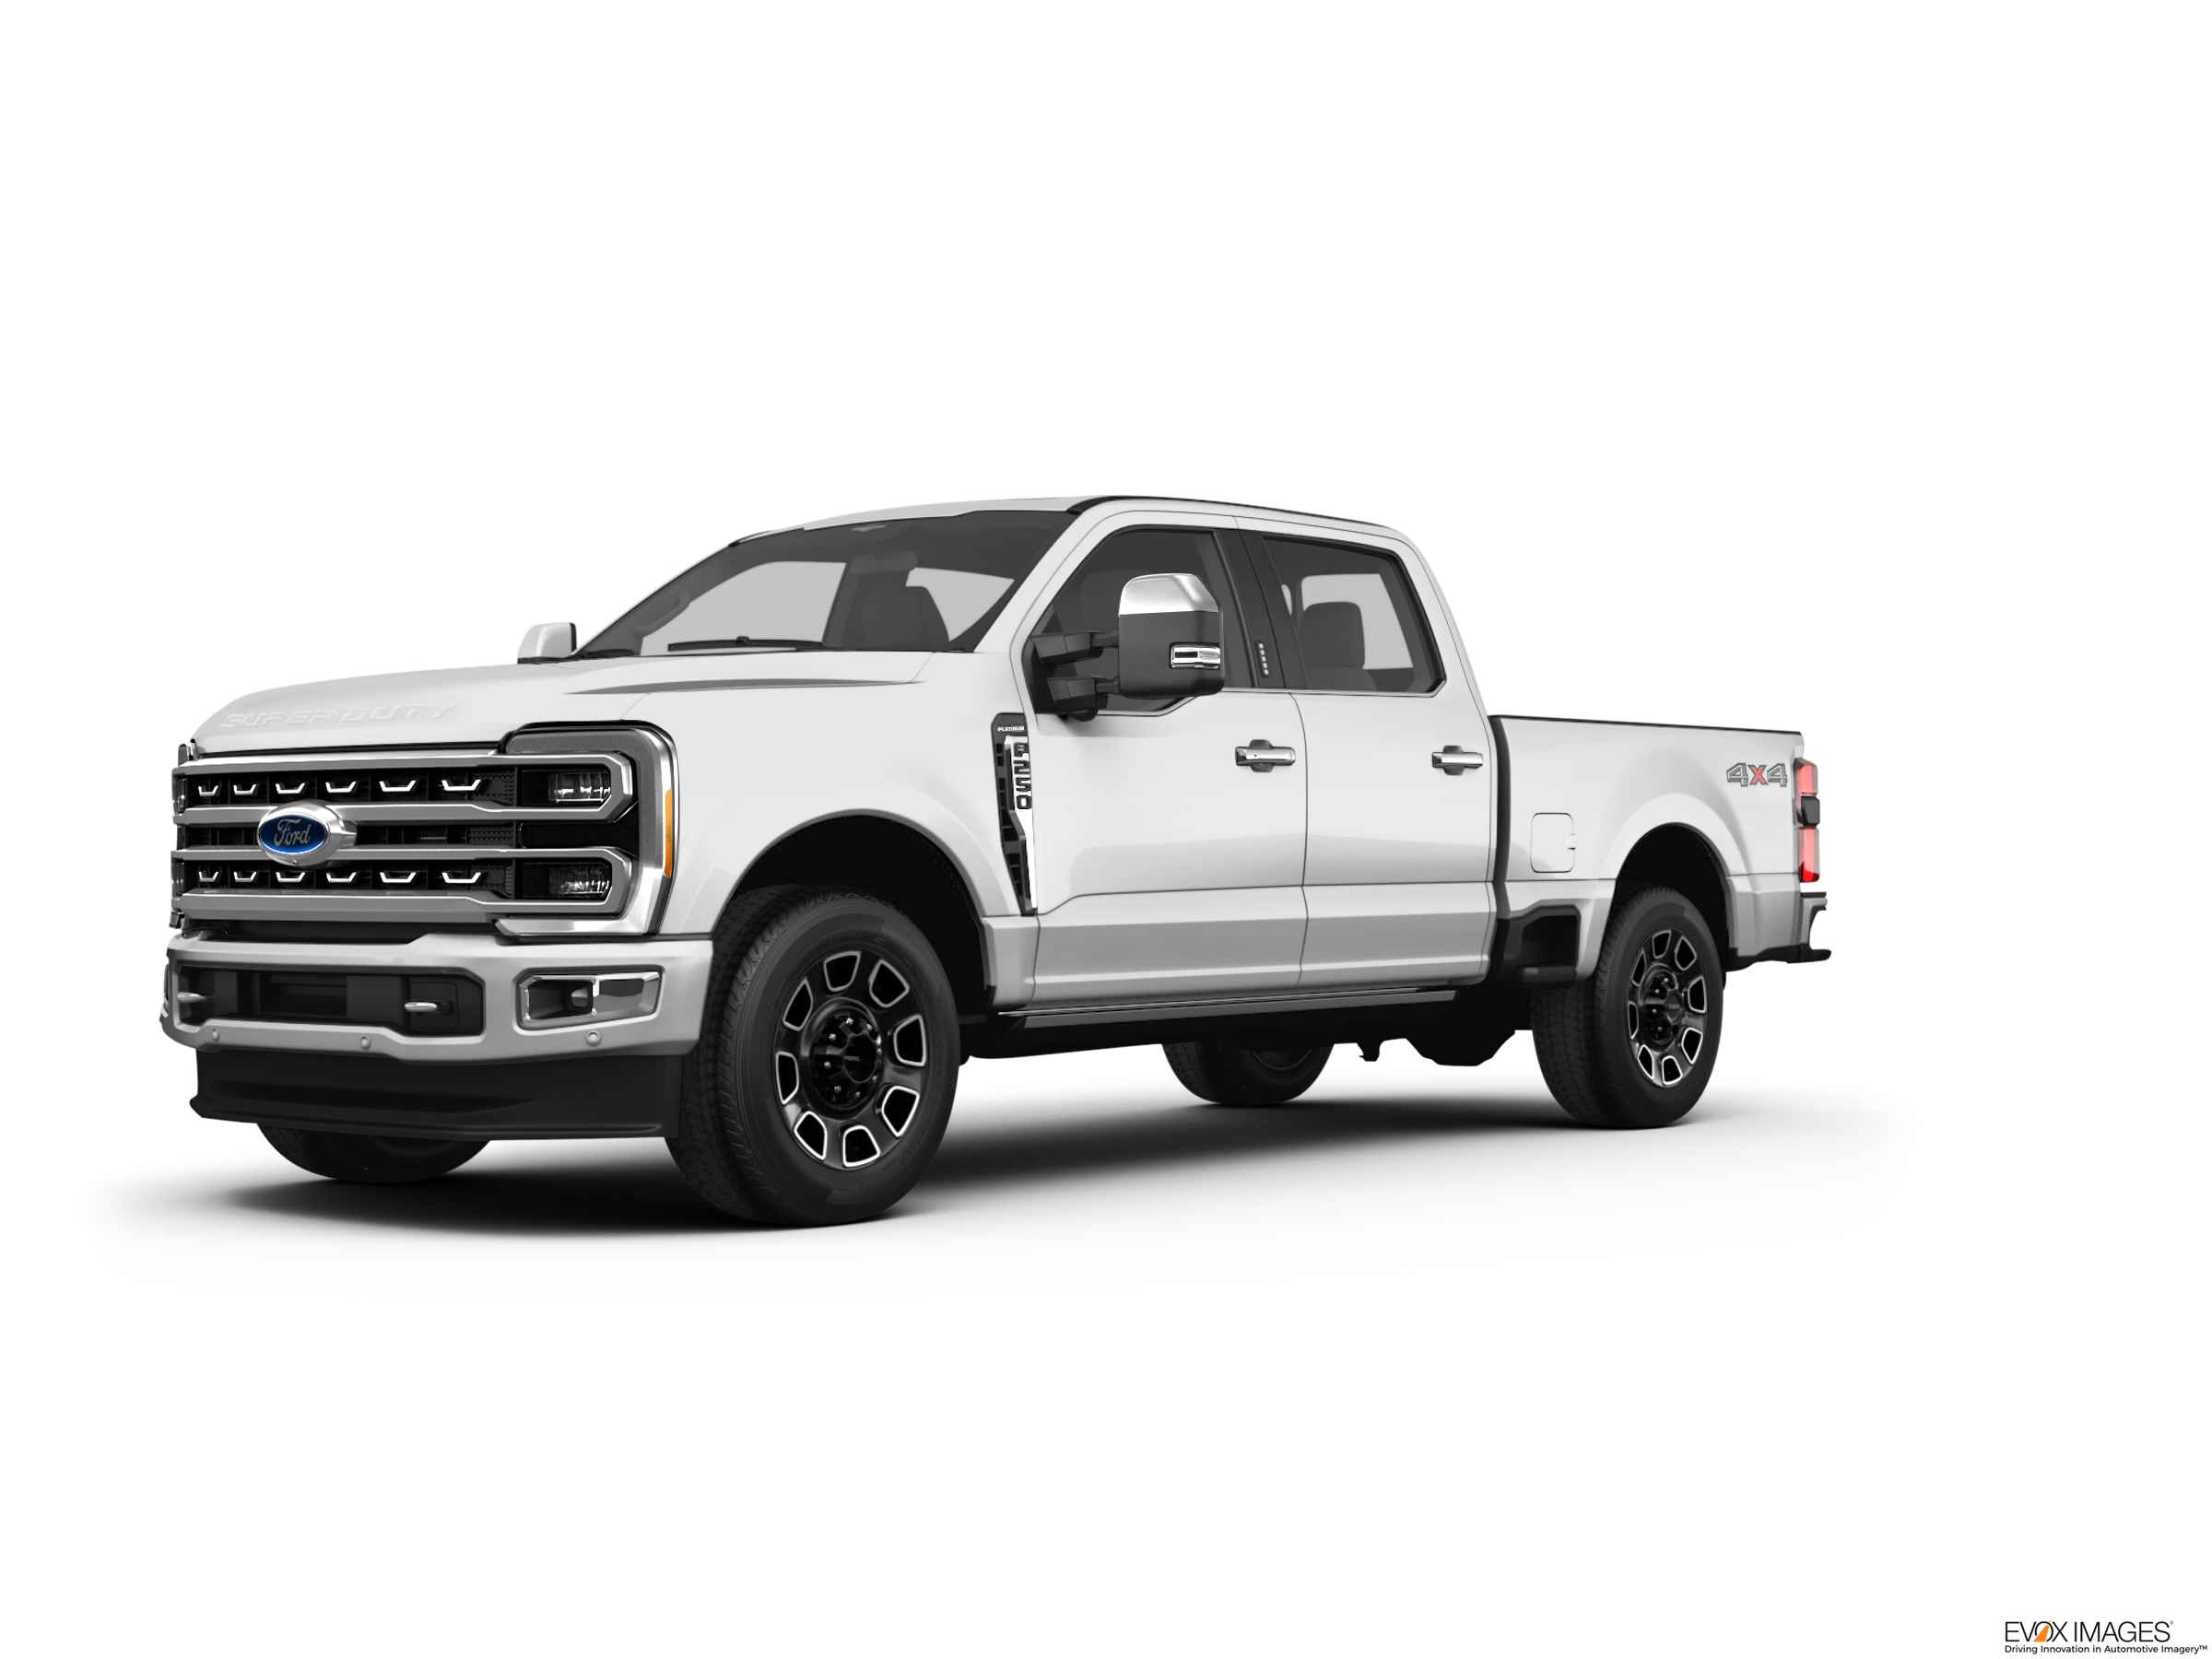 2023 Ford F250 Super Duty Crew Cab Price, Reviews, Pictures & More